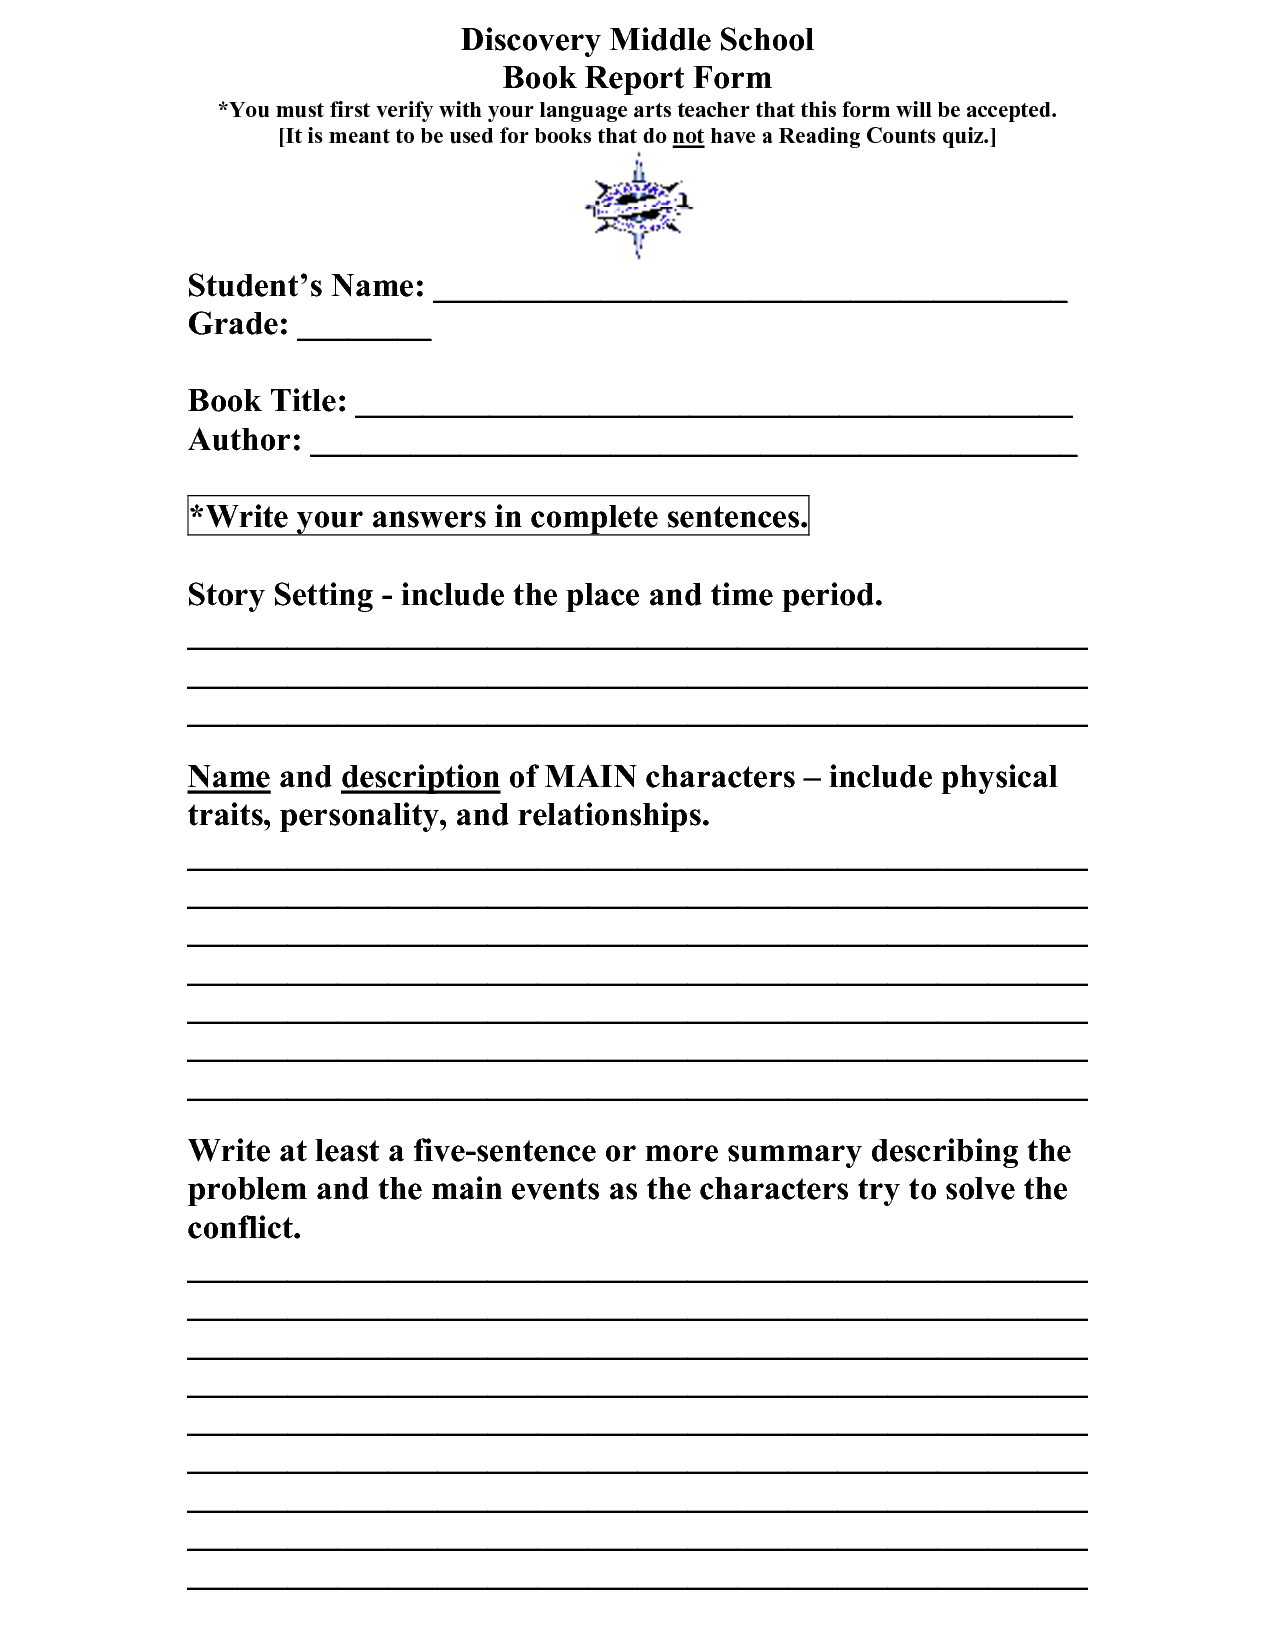 Free book report templates for middle school